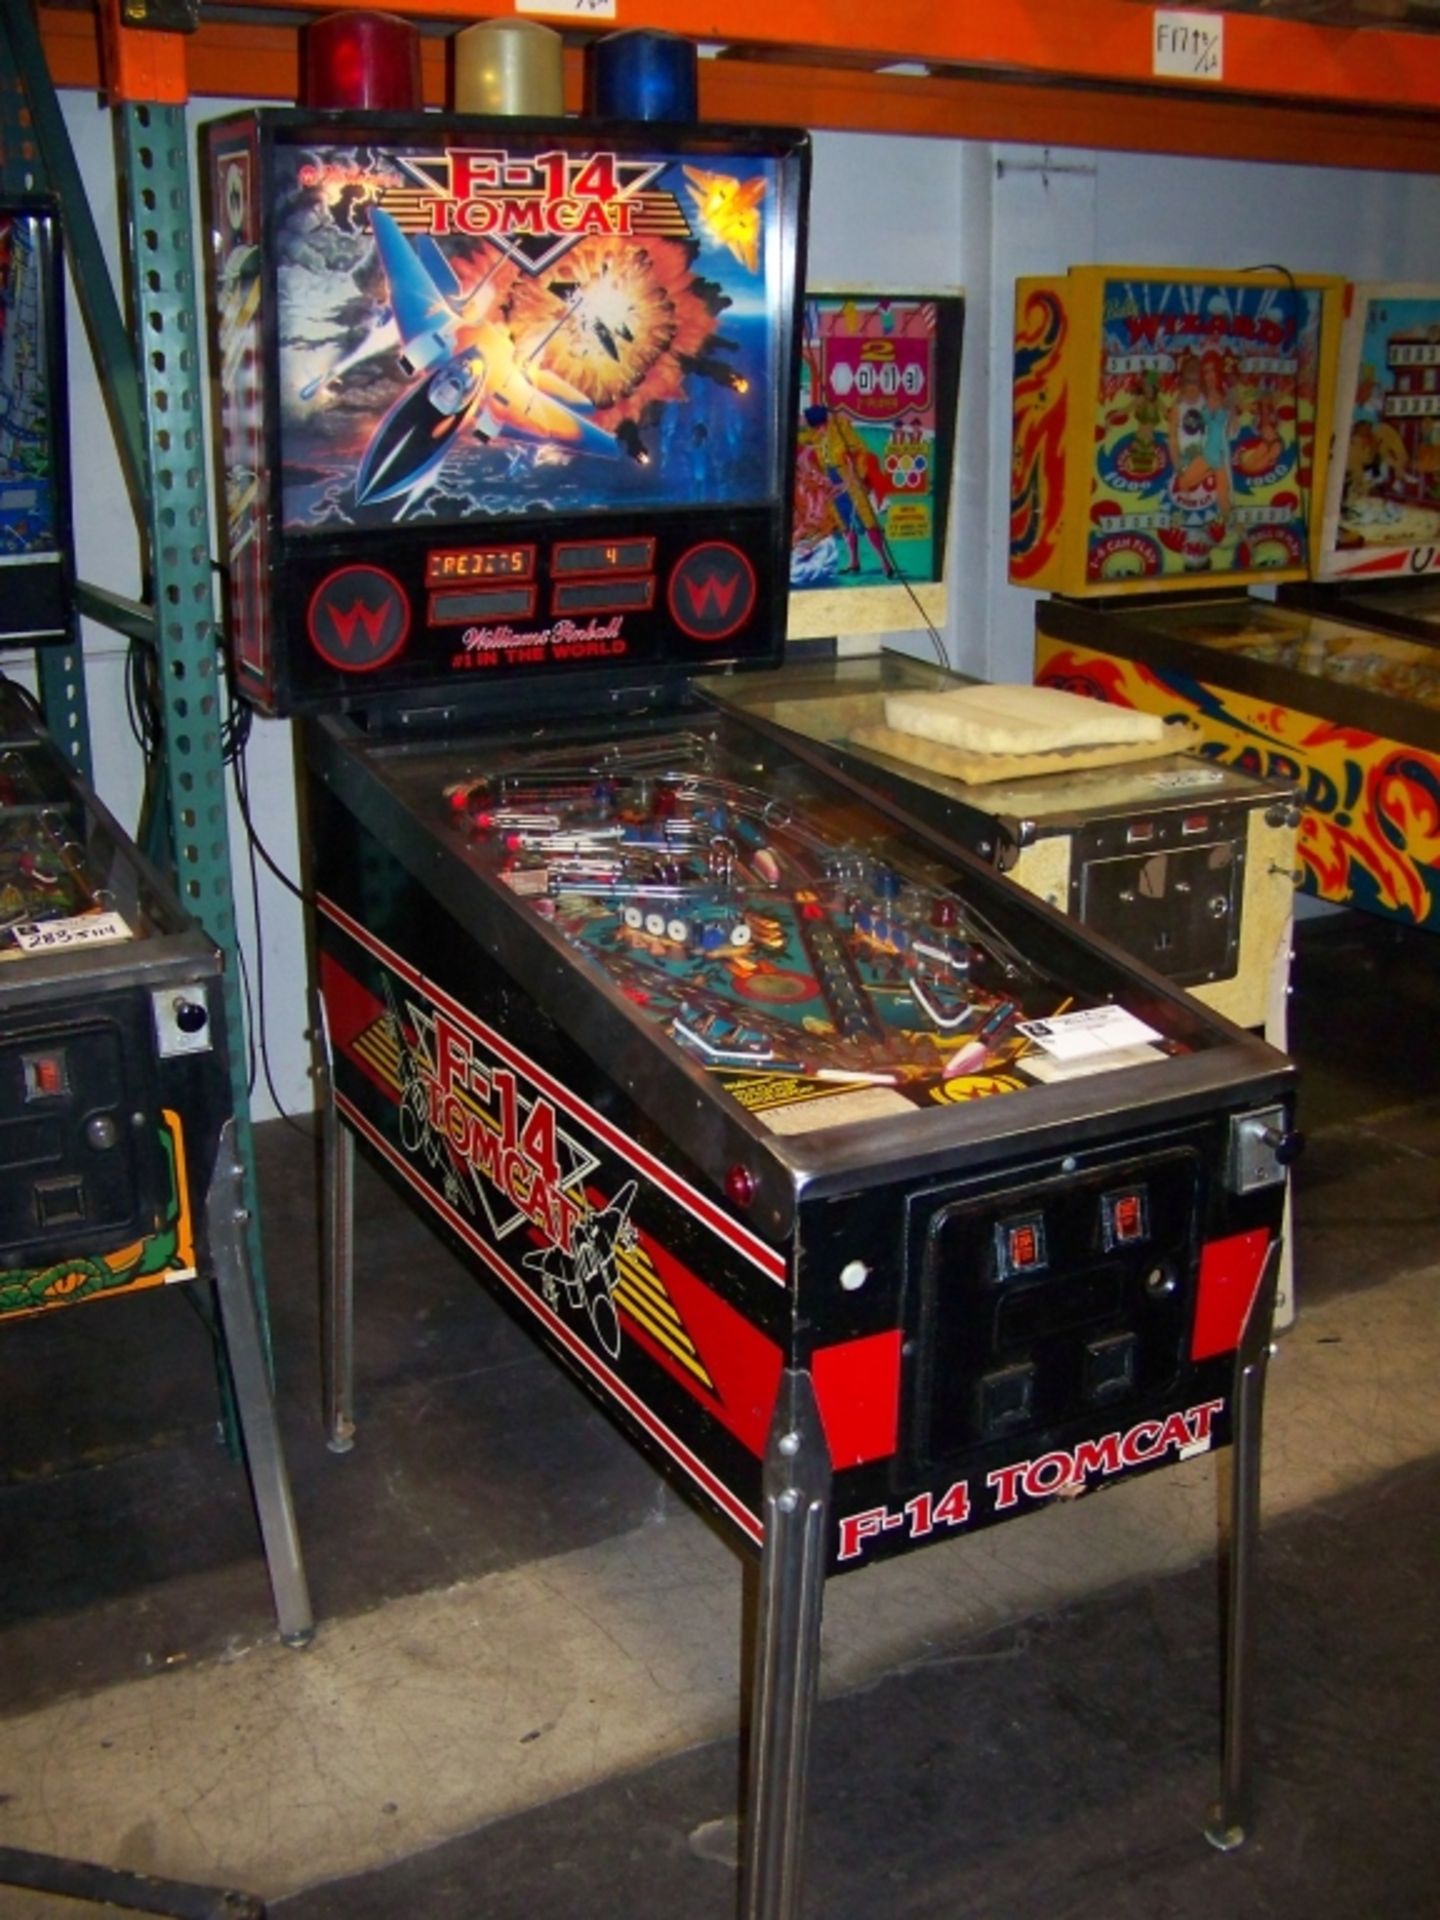 F-14 TOMCAT PINBALL MACHINE WILLIAMS 1987 Item is in used condition. Evidence of wear and commercial